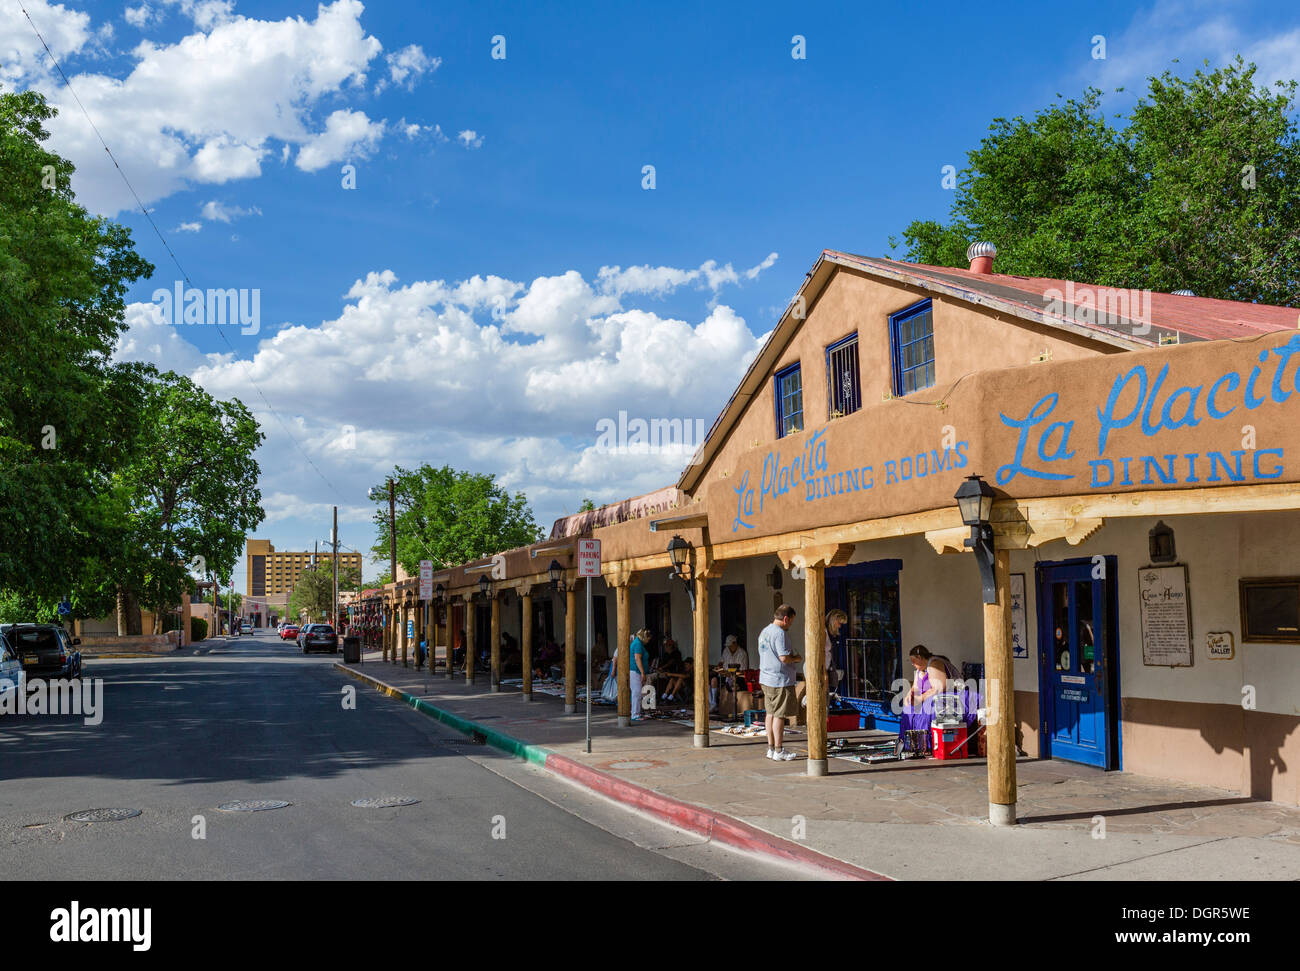 Restaurant, shops and street traders on Old Town Plaza, San Felipe Street, Old Town, Albuquerque, New Mexico, USA Stock Photo